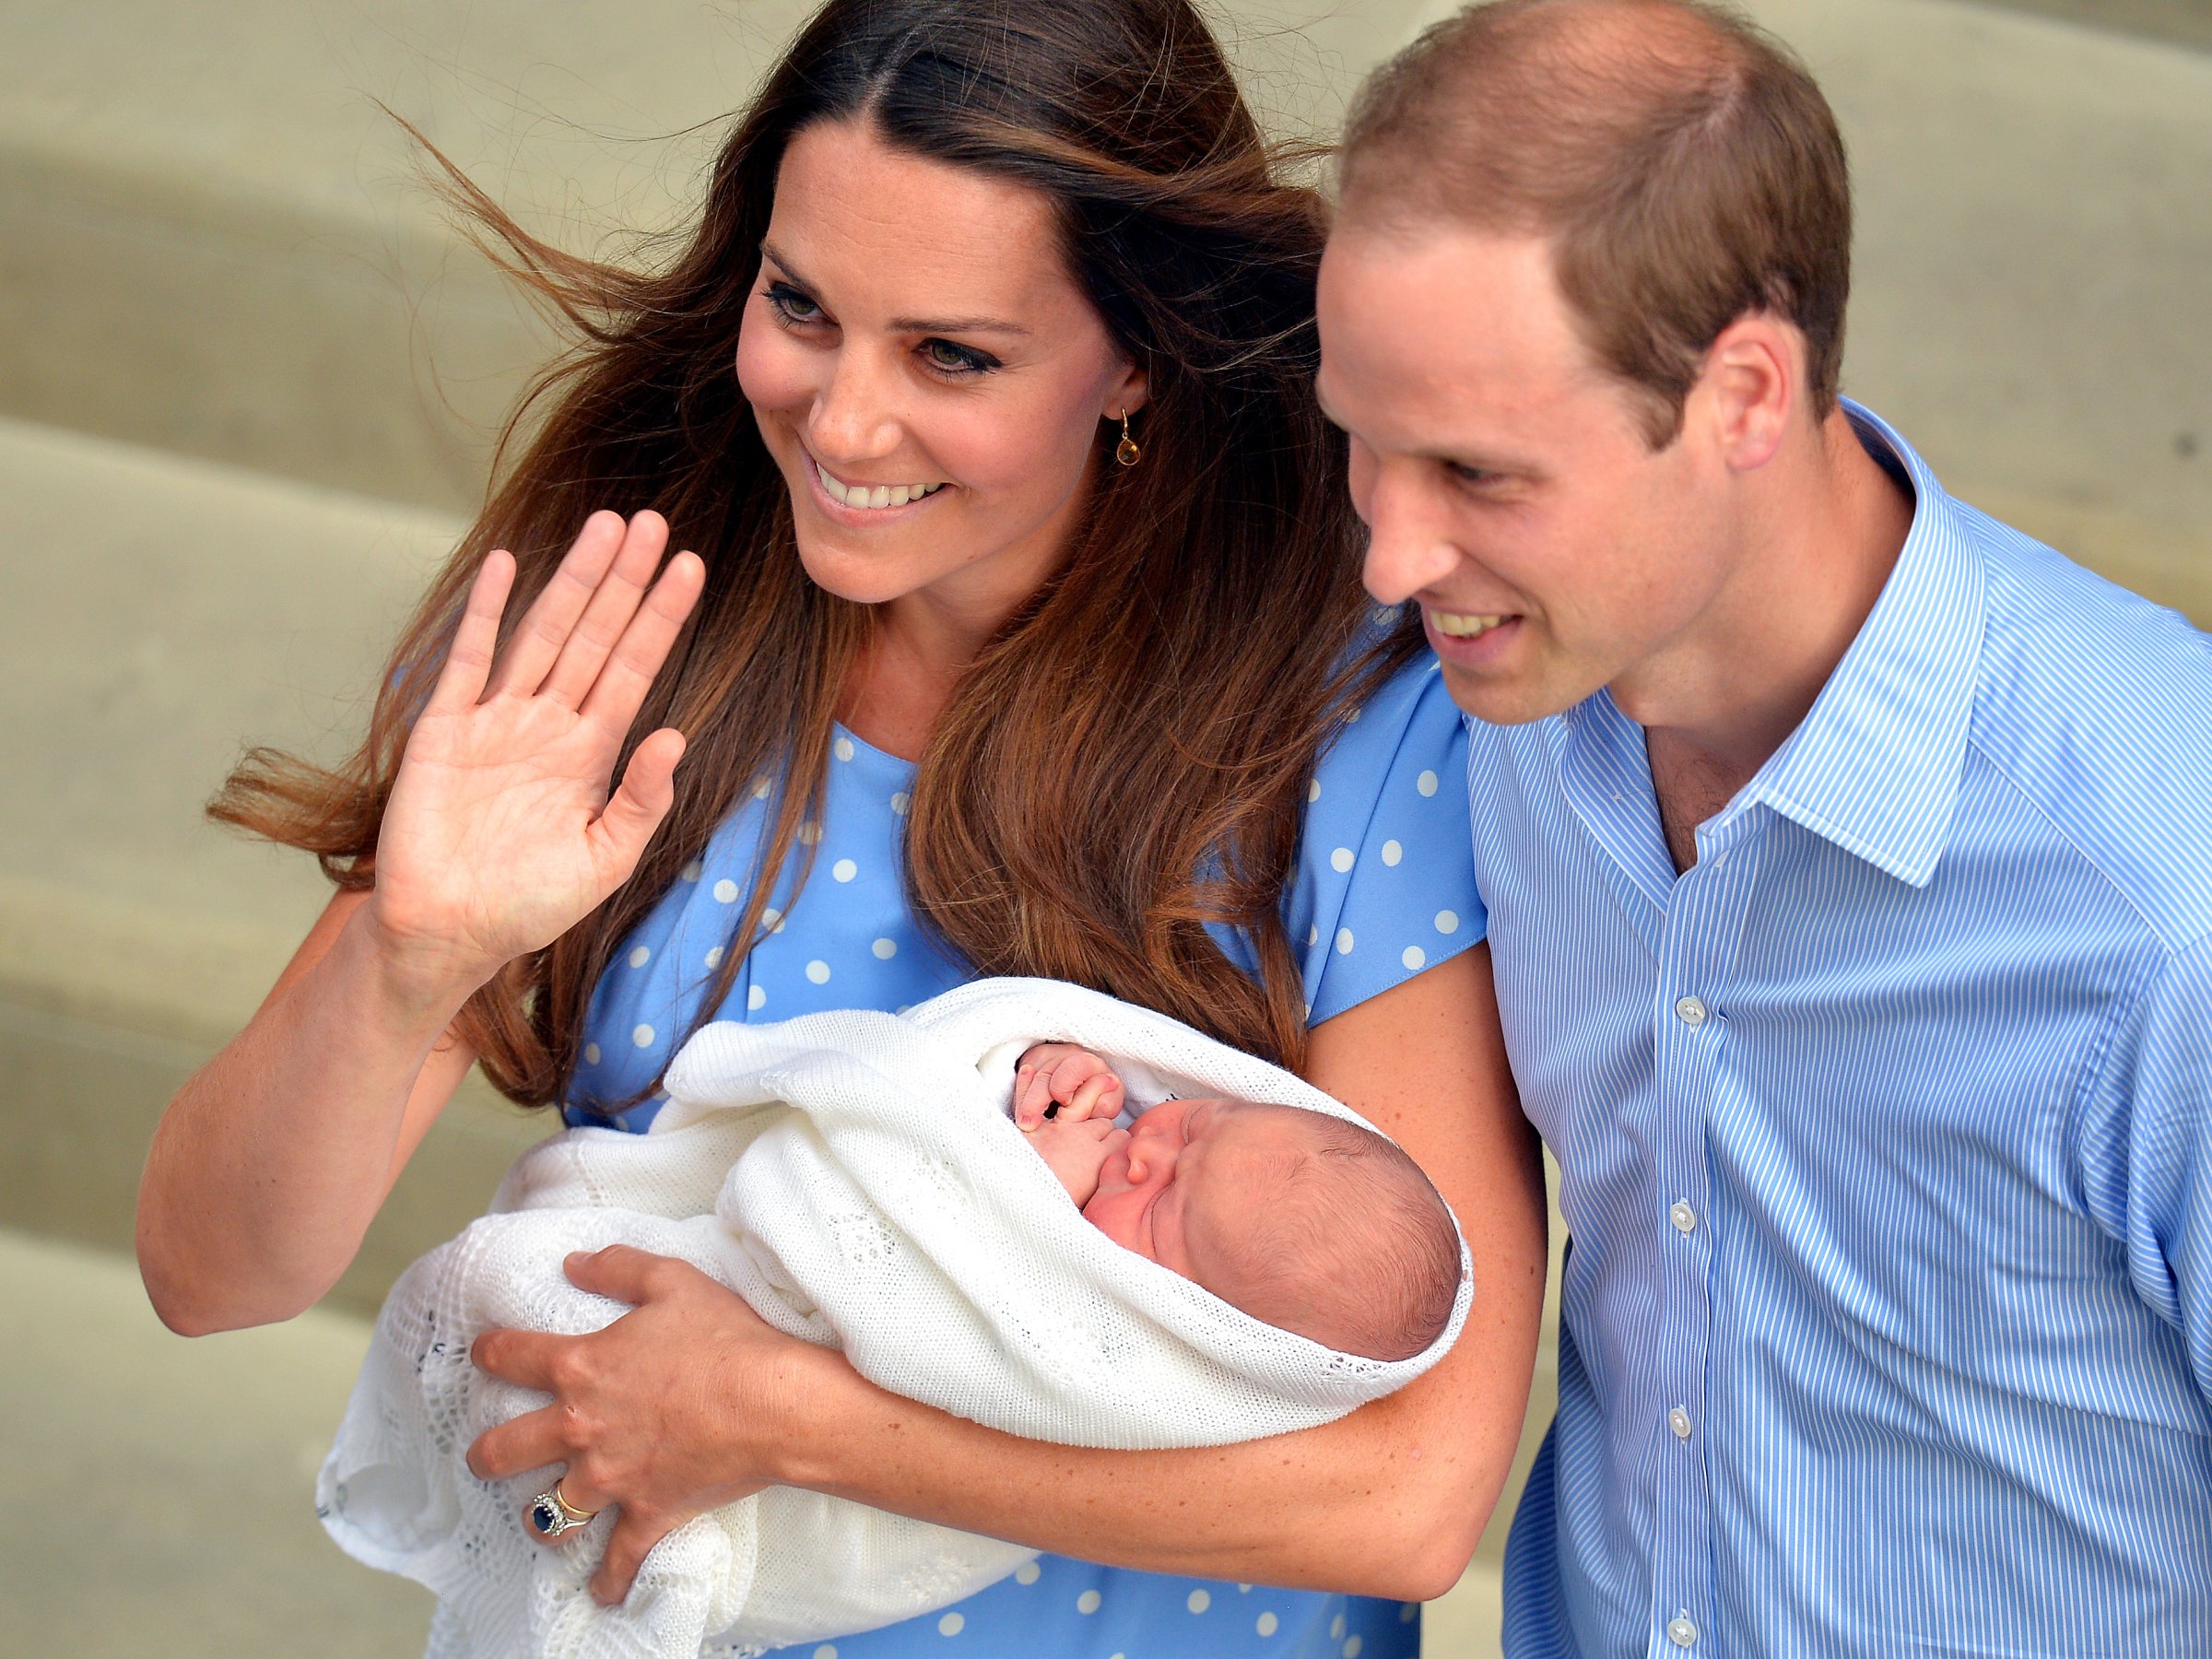 Prince William and Catherine, Duchess of Cambridge show their new-born baby boy to the world's media outside the Lindo Wing of St Mary's Hospital in London on July 23, 2013. The baby was born on Monday afternoon weighing eight pounds six ounces (3.8 kilogrammes). The baby, titled His Royal Highness, Prince (name) of Cambridge, is directly in line to inherit the throne after Charles, Queen Elizabeth II's eldest son and heir, and his eldest son William. AFP PHOTO / POOL / John Stillwell (Photo credit should read JOHN STILLWELL/AFP/Getty Images)